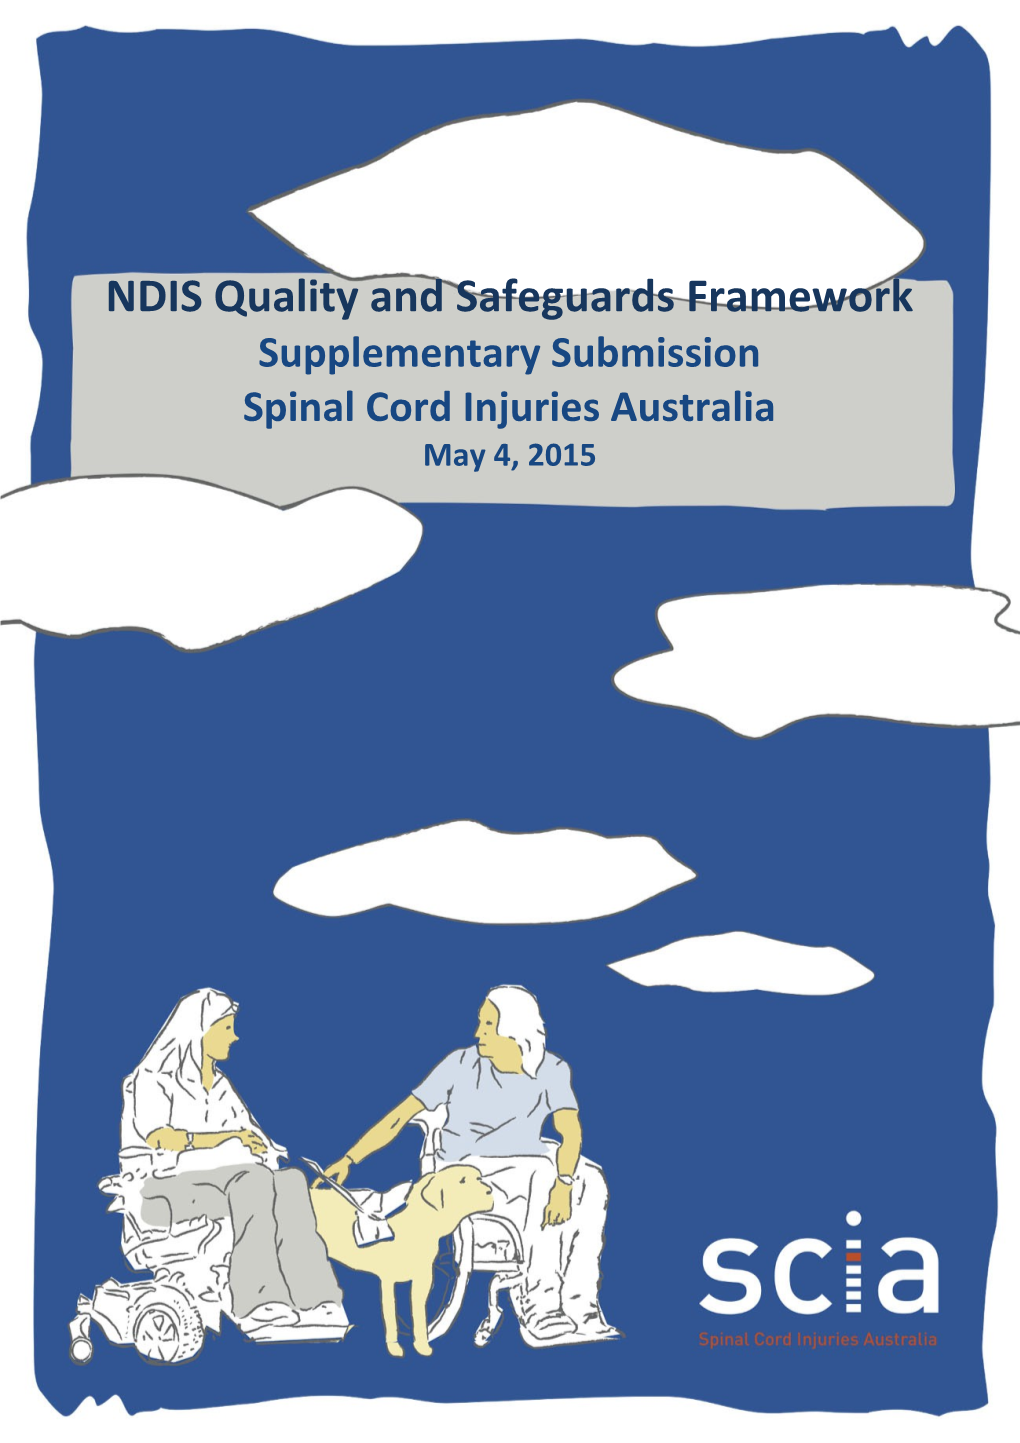 NDIS Quality and Safeguards Framework Submission